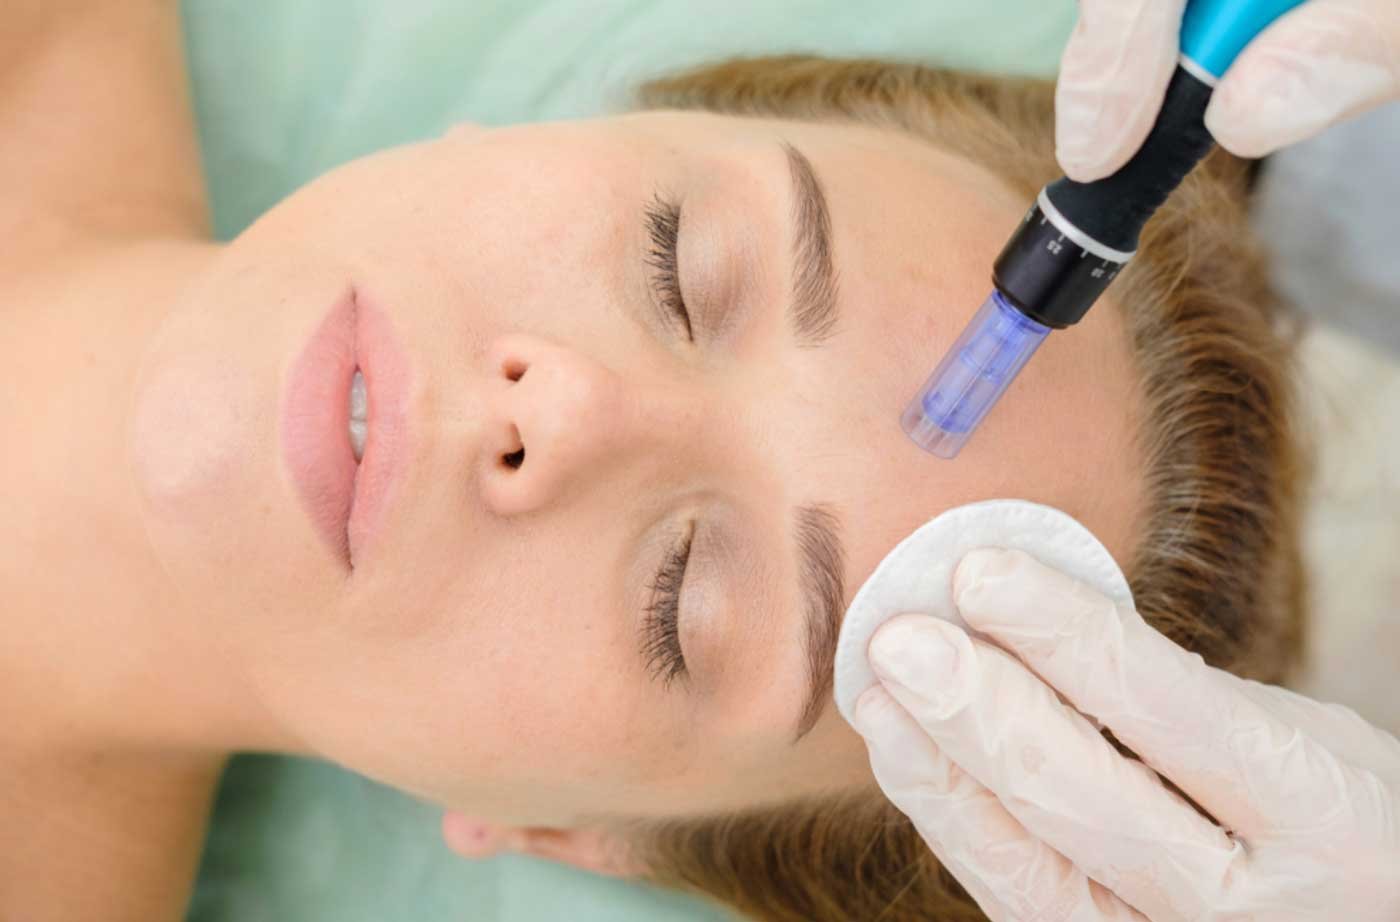 Why are Celebs obsessed with Microneedling